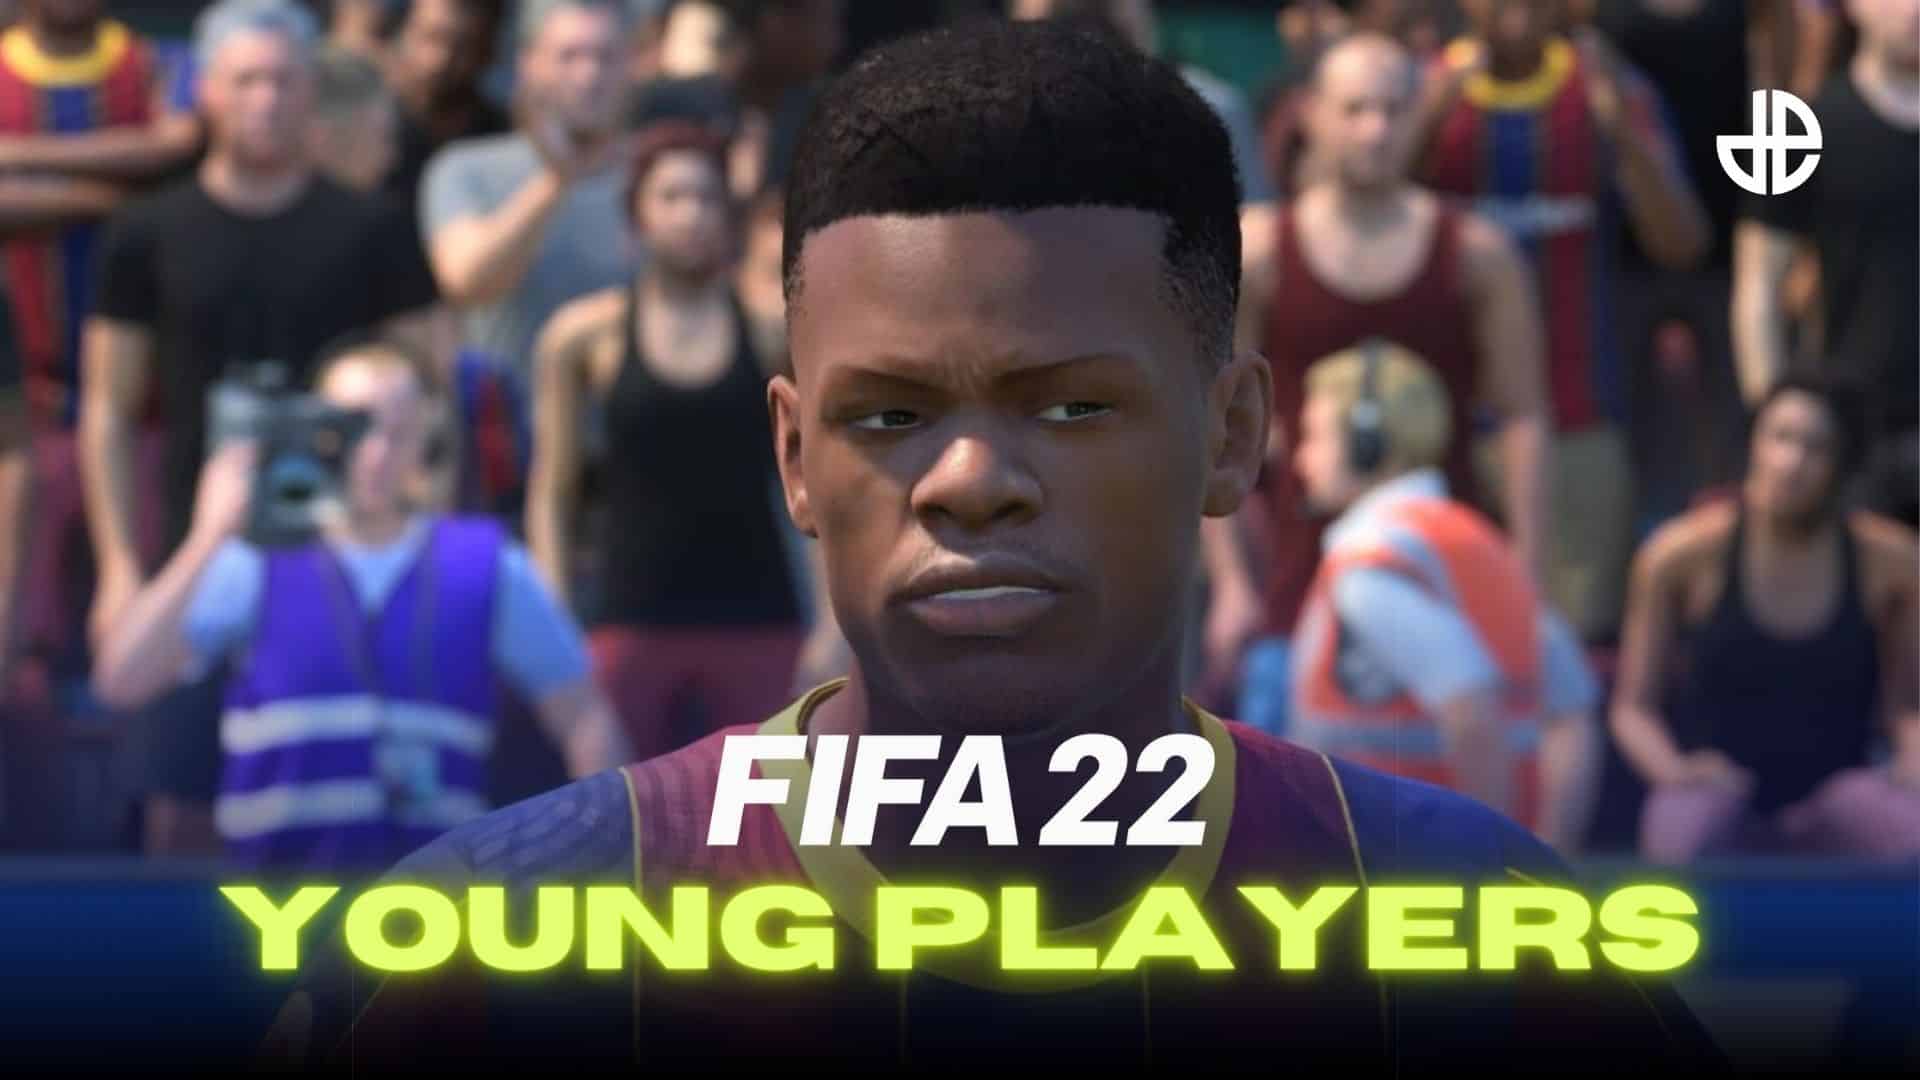 FIFA 23 best young defenders: The top 50 DEFs on Career Mode